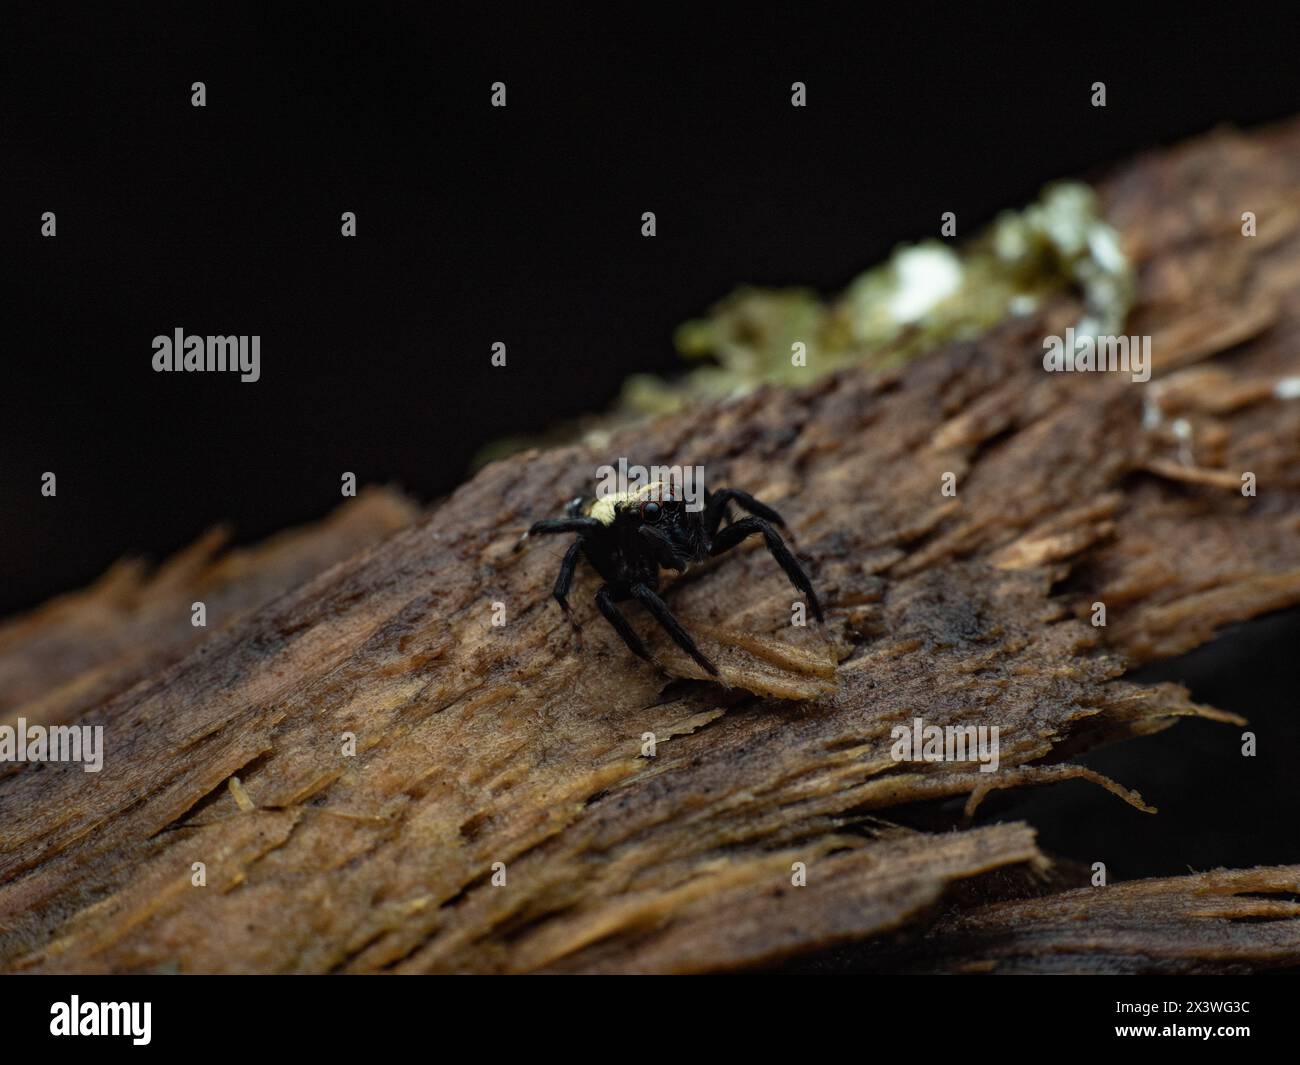 front view of sword-bearing jumping spider on wet wood Stock Photo